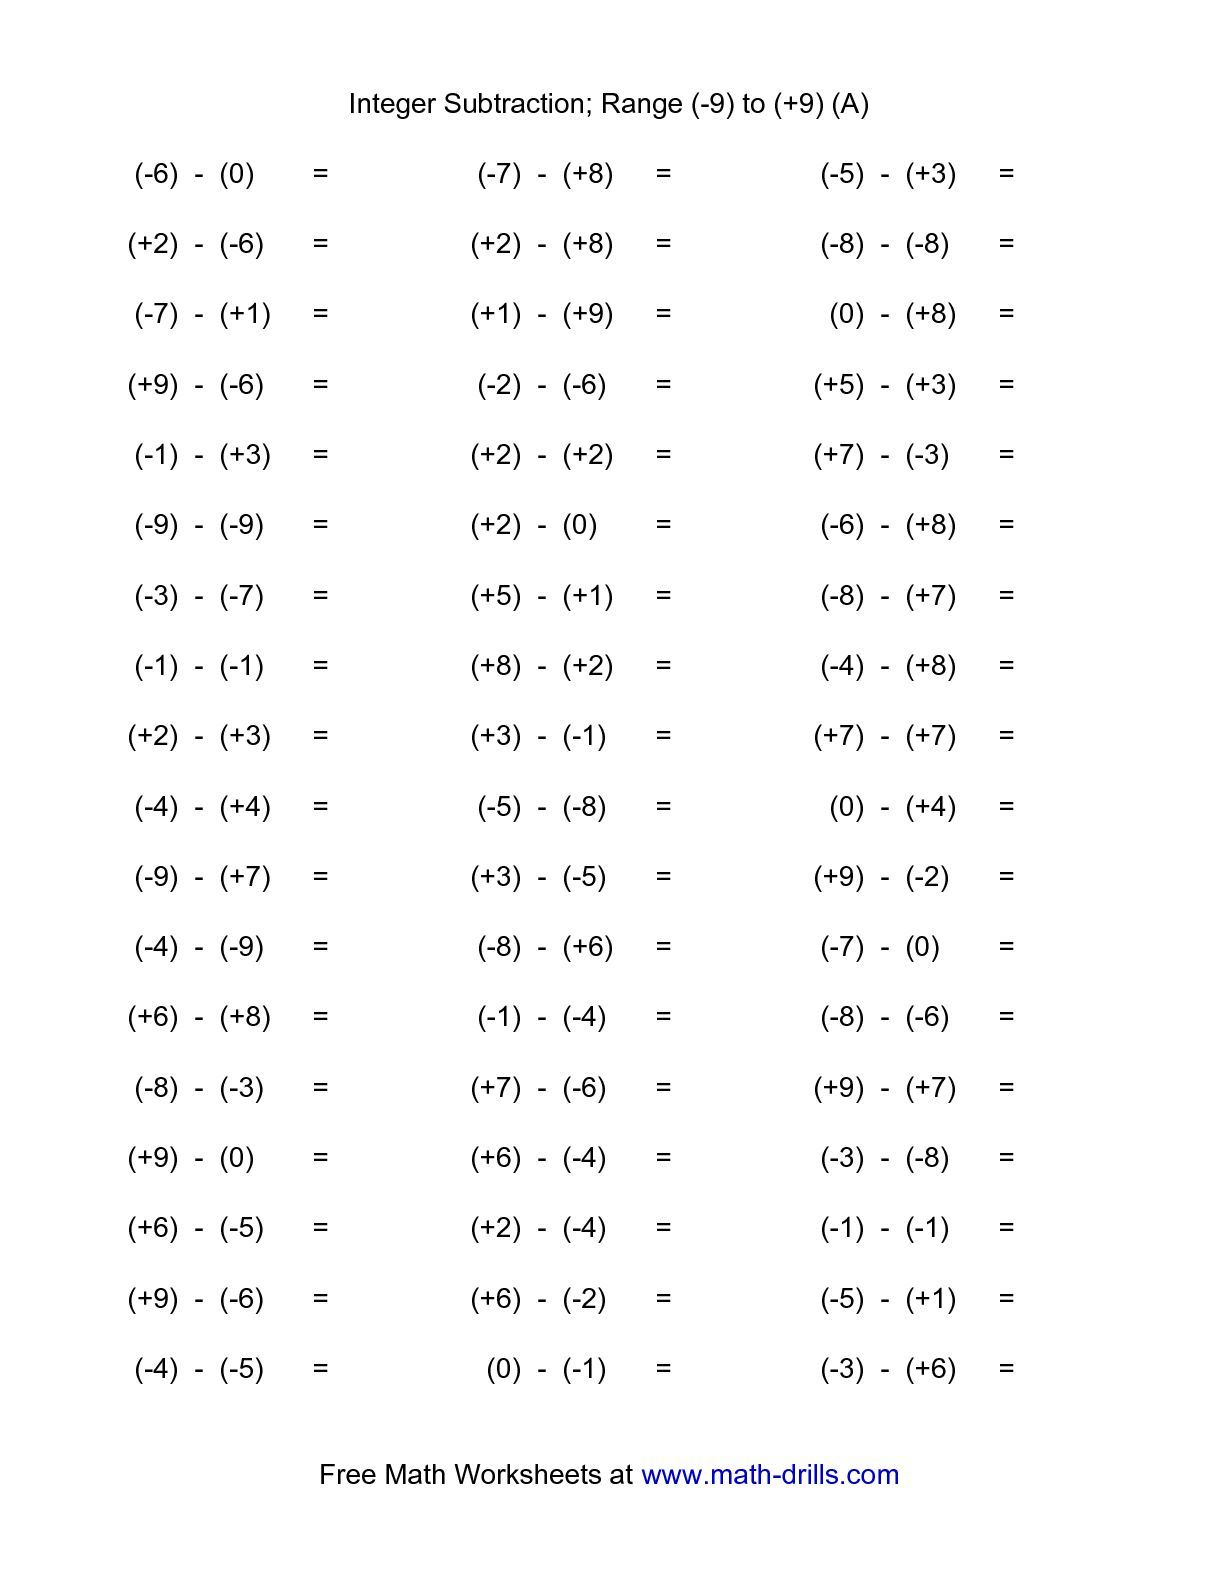 Integers Rules Number Line Notes And Practice Problems Worksheets 